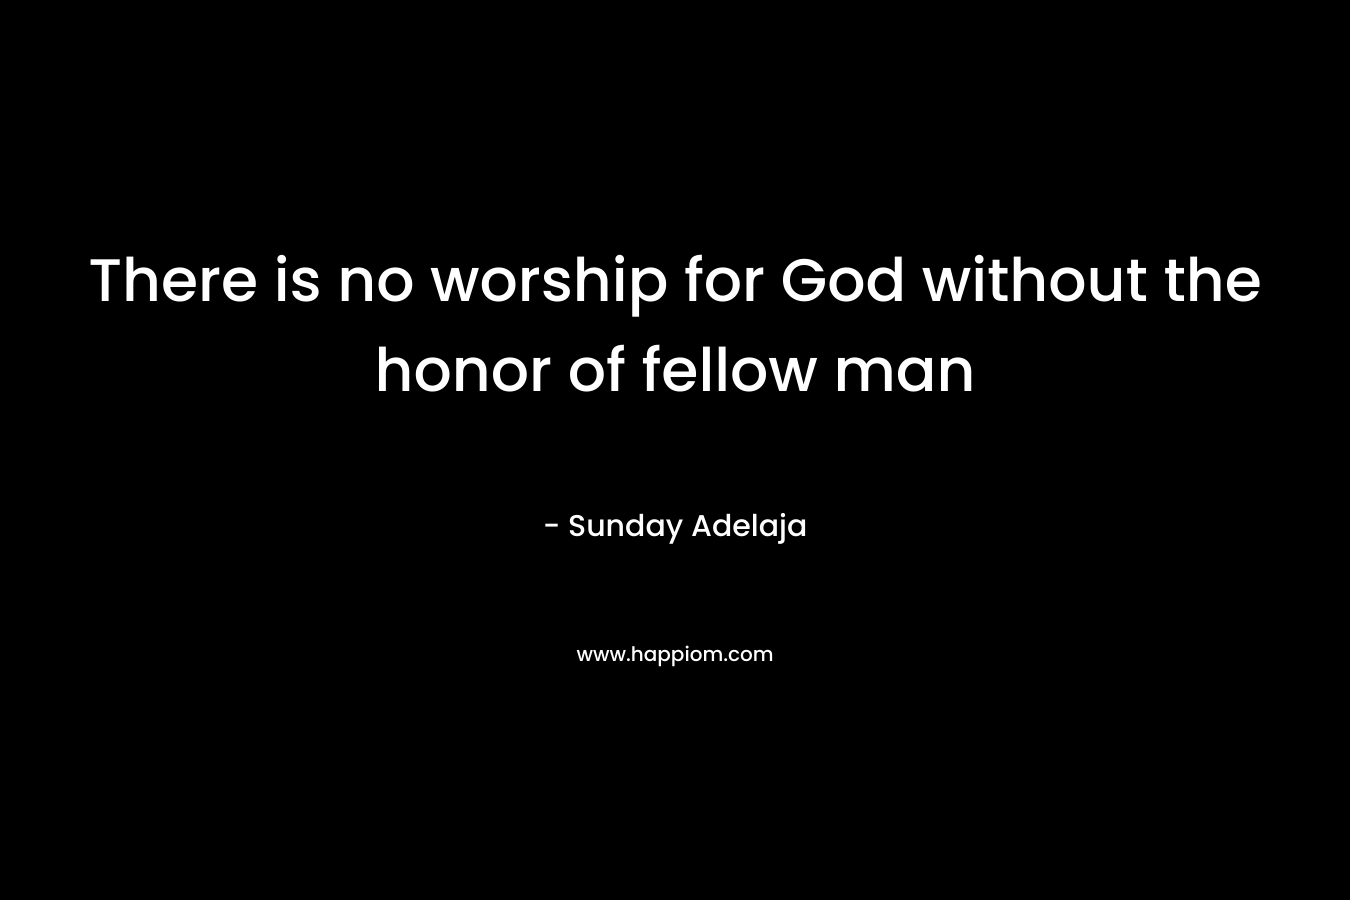 There is no worship for God without the honor of fellow man